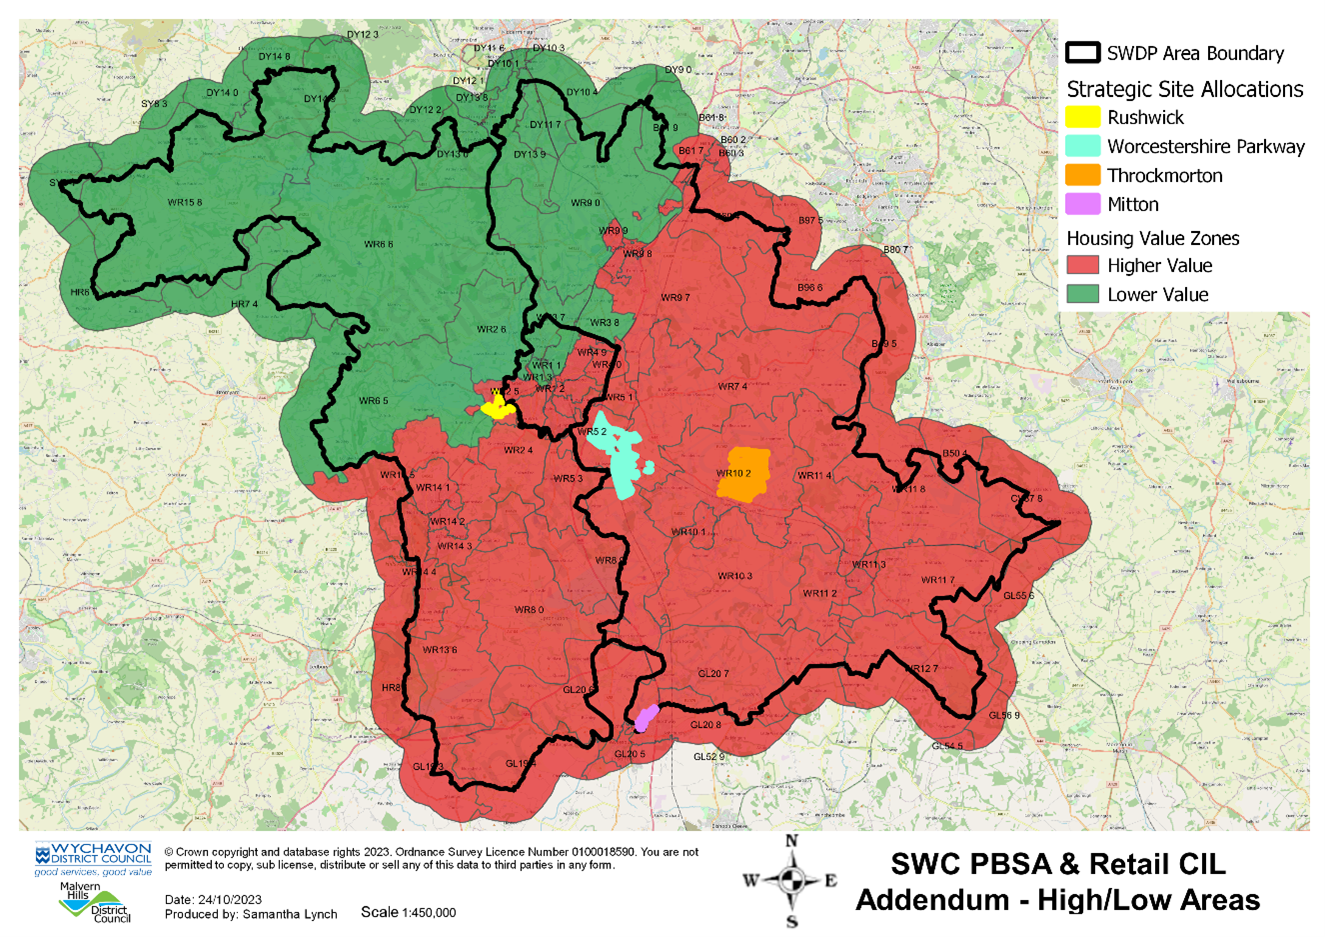 Map 1: Map of the higher and lower value areas in south Worcestershire and locations of the strategic sites in the SWDP Review